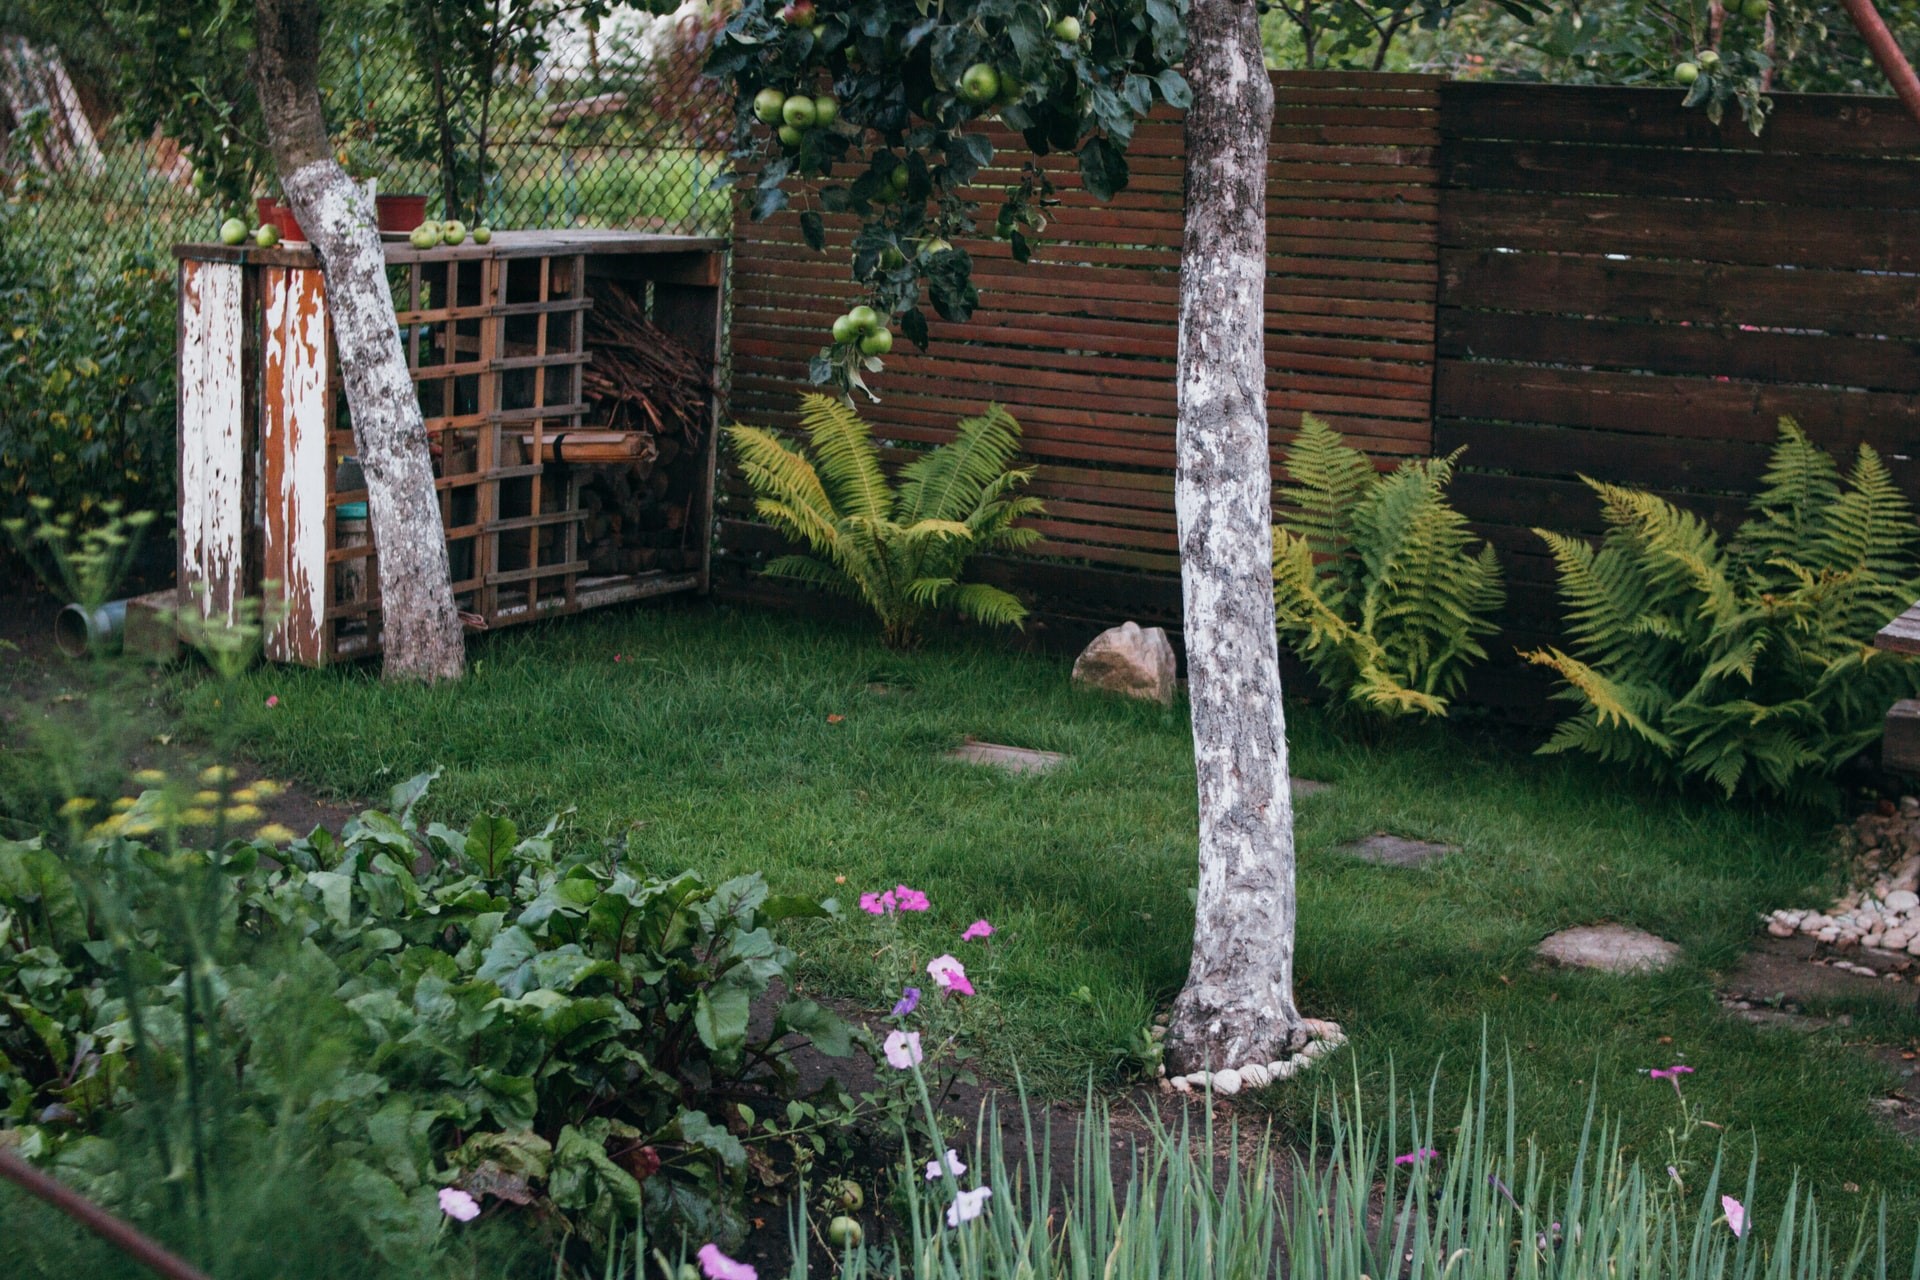 Back garden with trees and plants